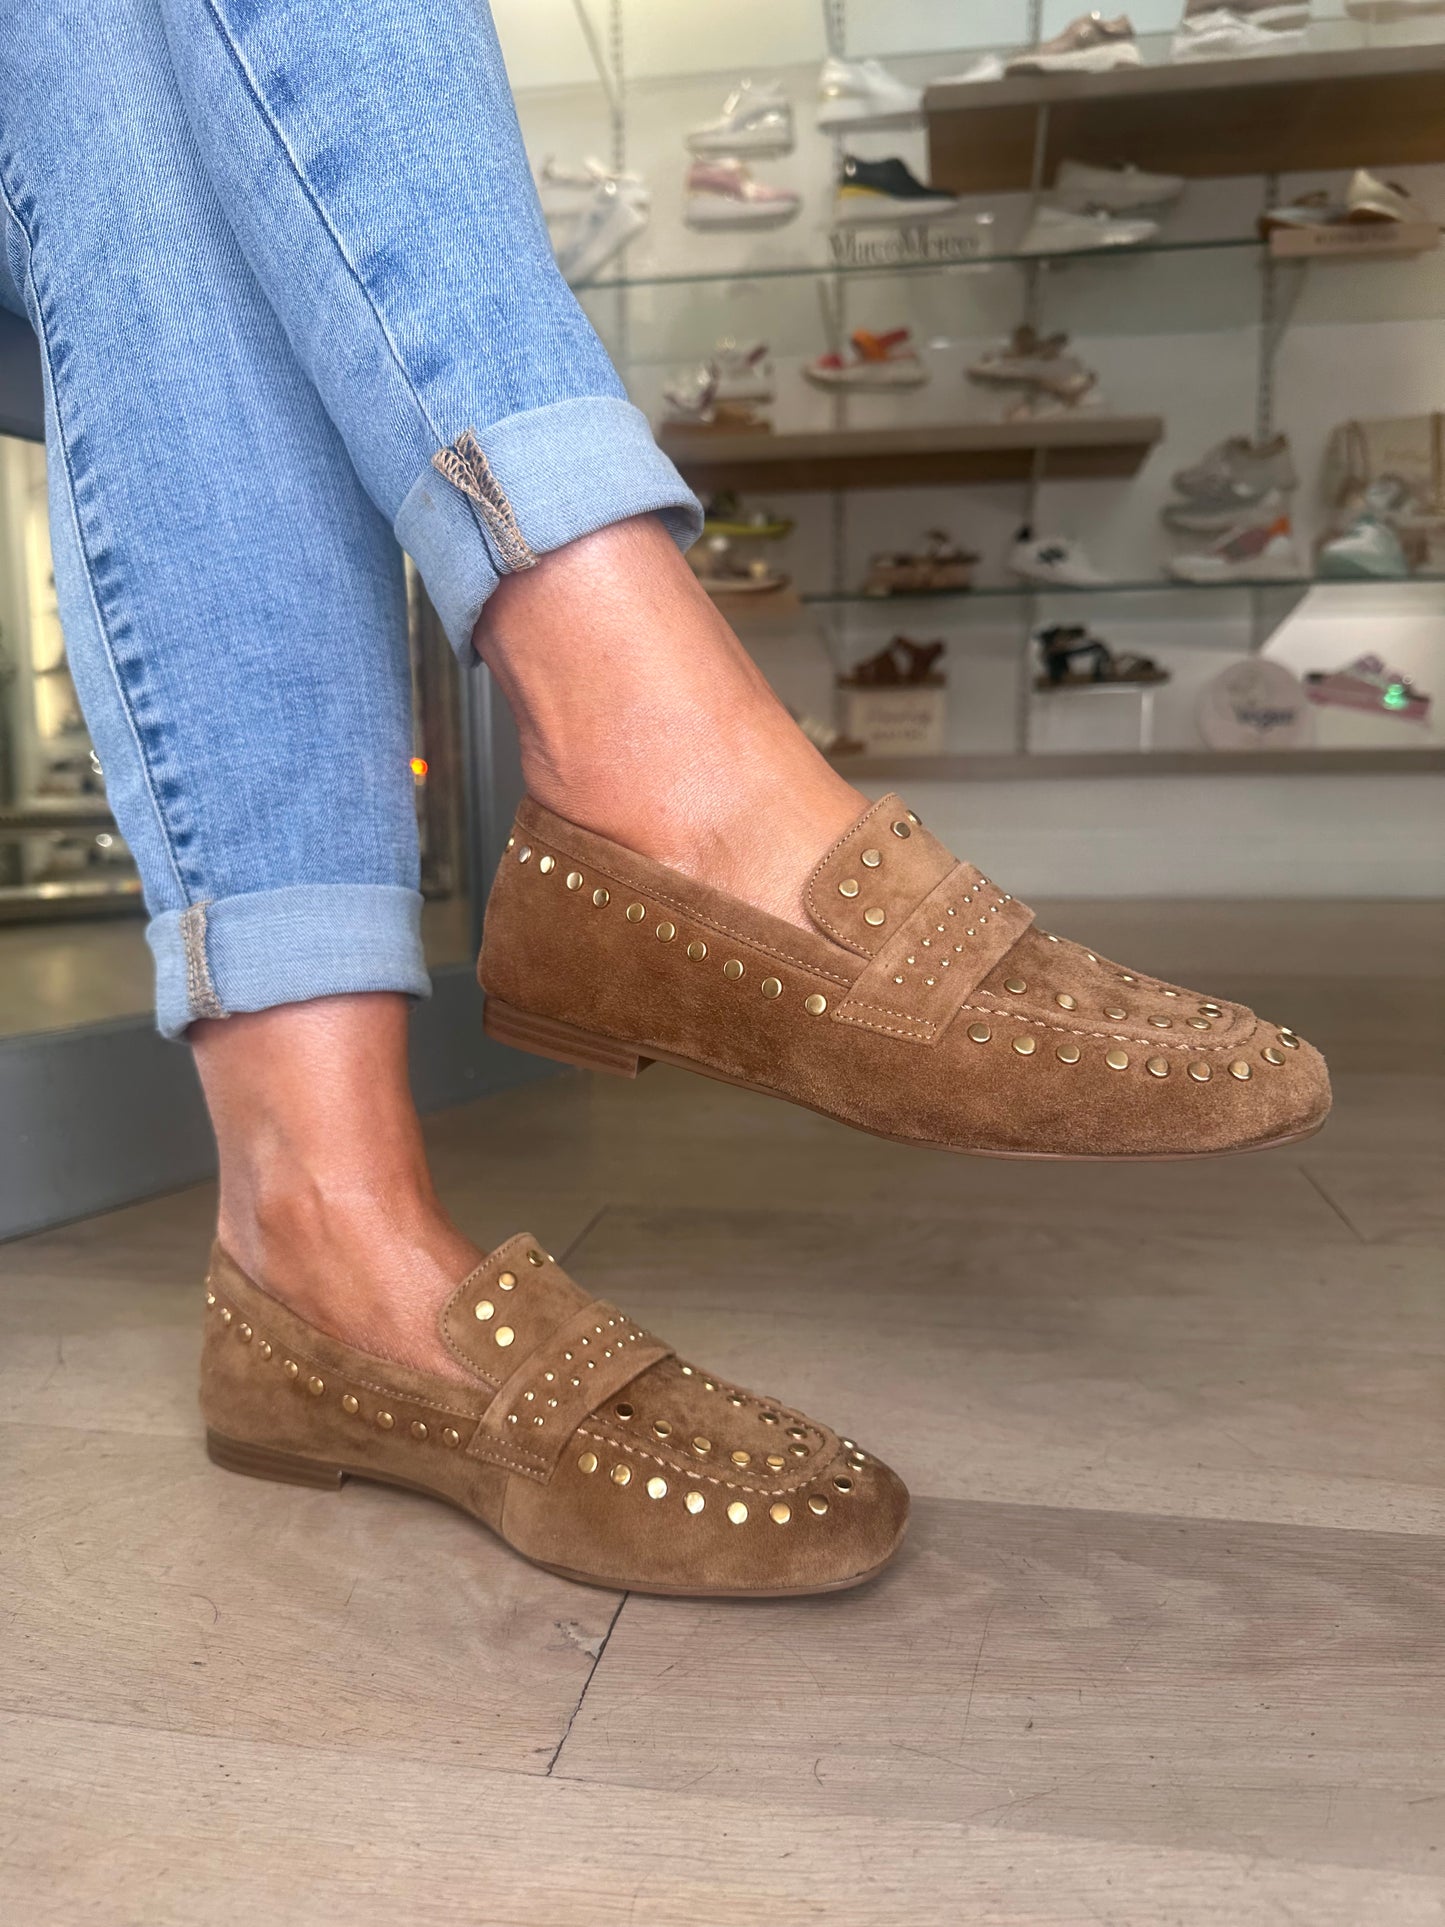 Lodi (Love) Tan Suede Loafer With Antique Gold Stud Trim